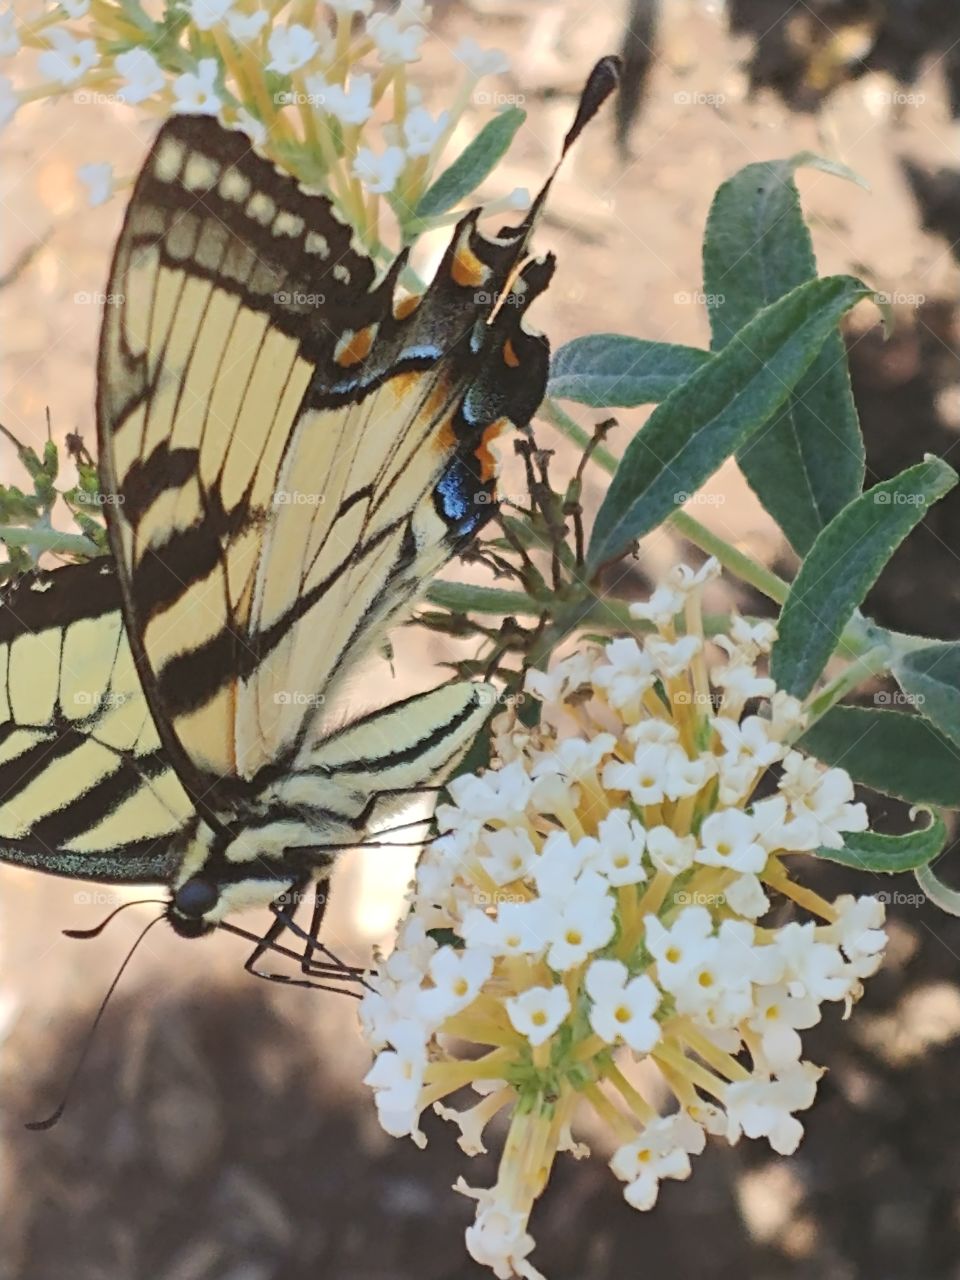 Close-up of a big yellow, black, orange, and blue butterfly resting on a cluster of light yellow flowers with dark green leaves.